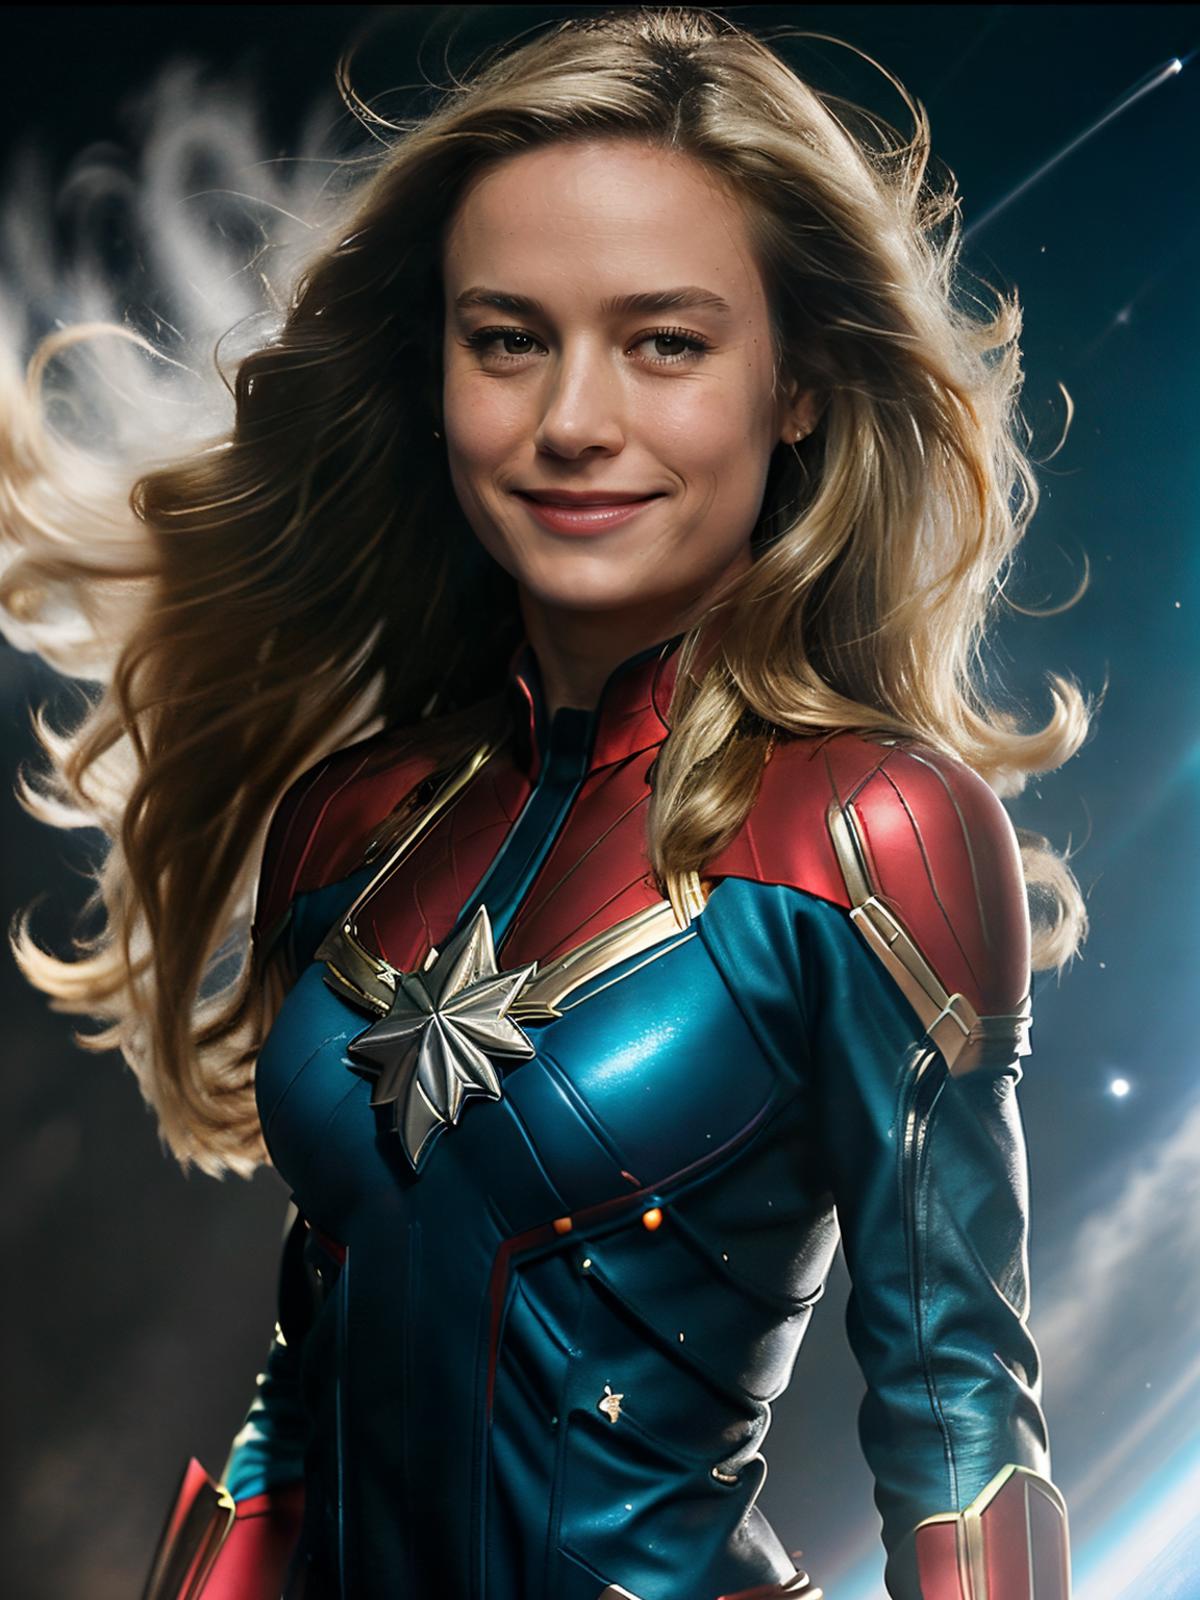 Brie Larson image by damocles_aaa